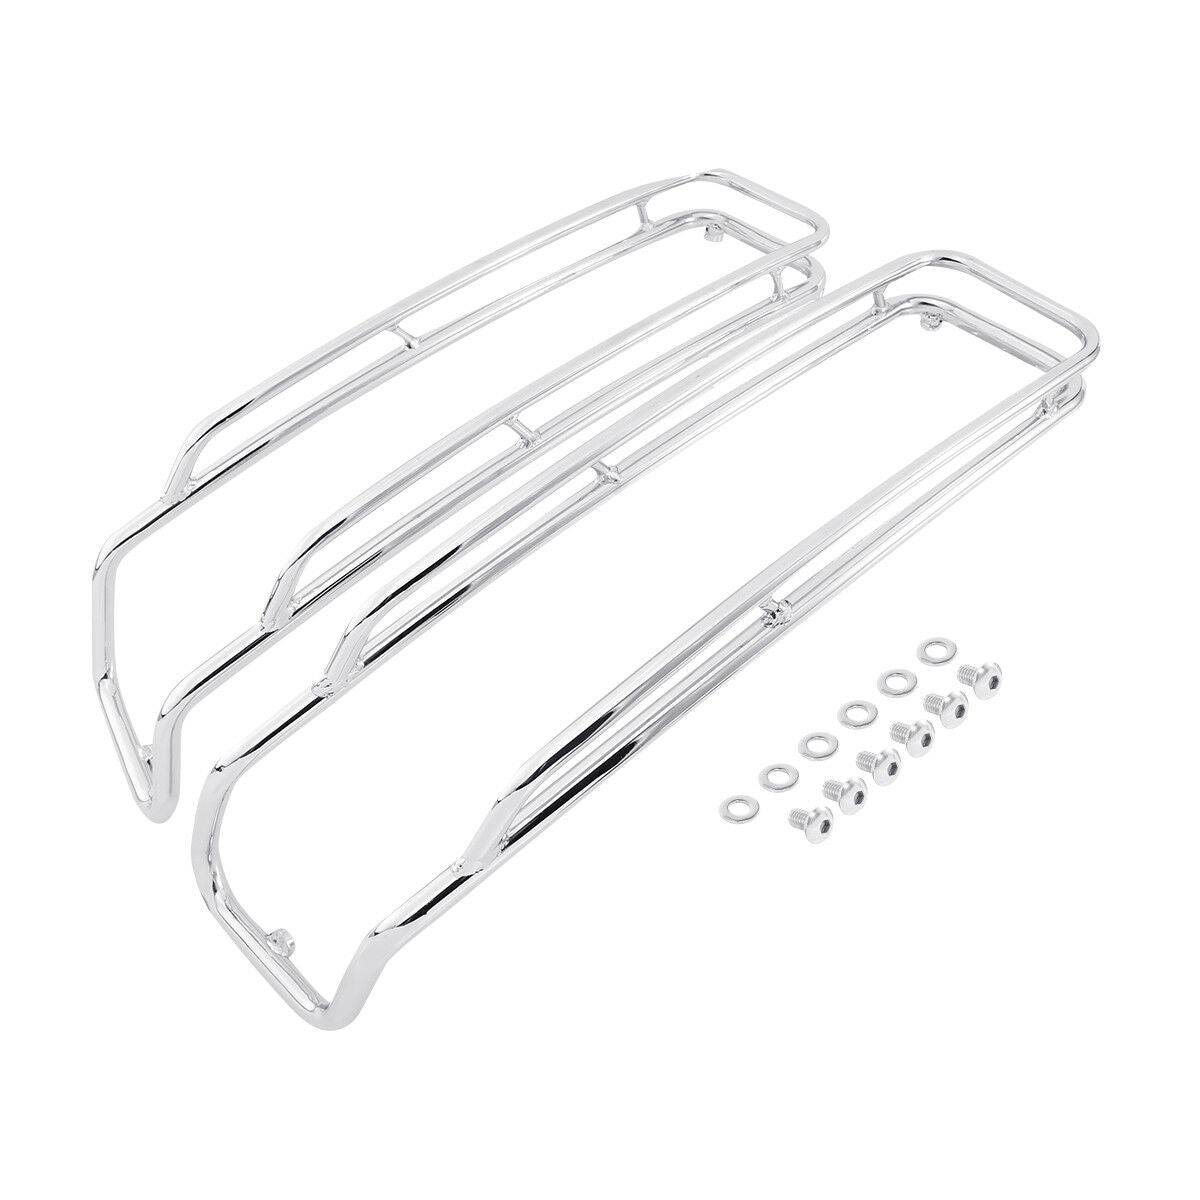 Saddlebags Lid Top Rail Guards Fit For Harley Touring Street Road Glide 94-2013 - Moto Life Products